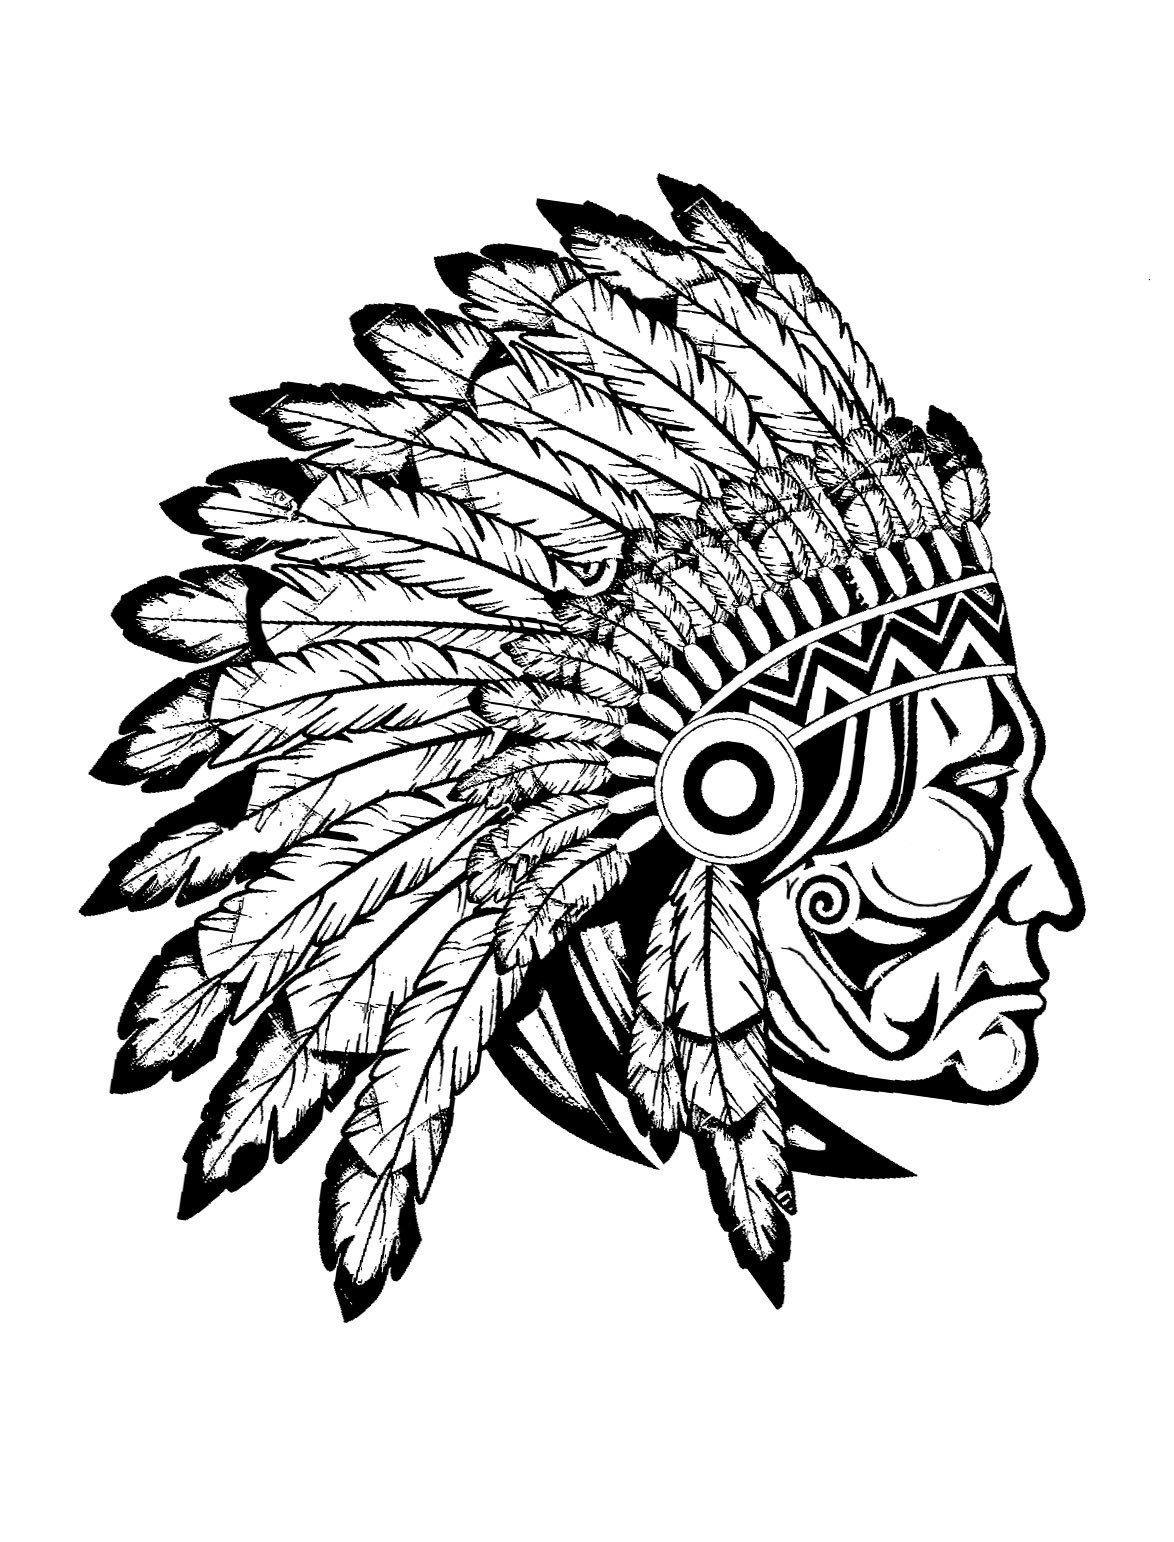 Indian Coloring Pages For Adults
 Indian native chief profile Native American Adult